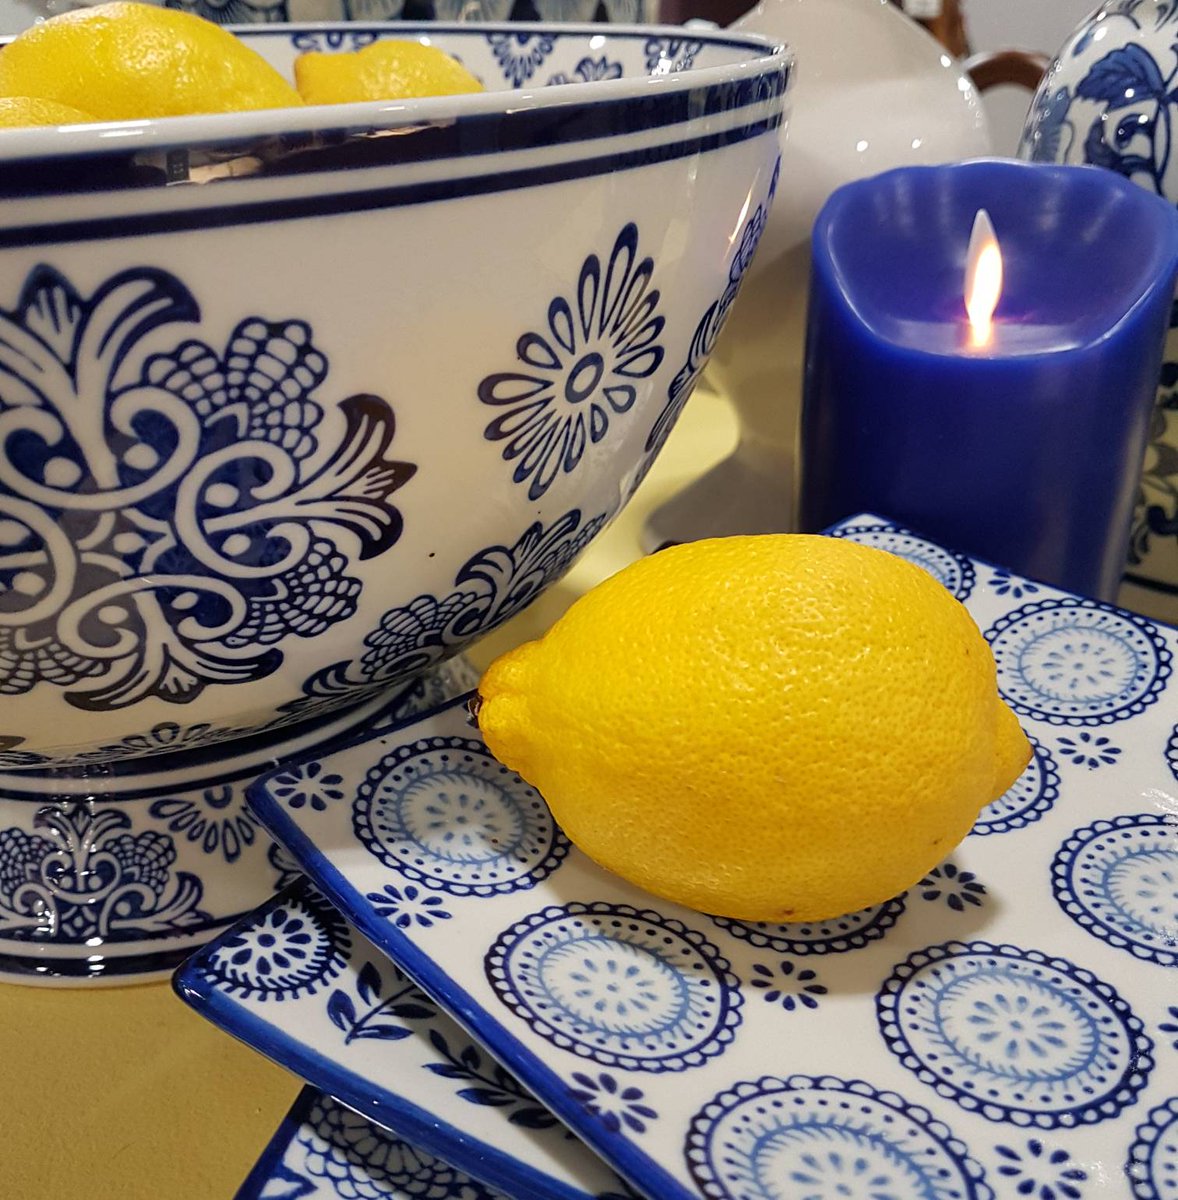 When life gives you lemons! Put them in a goregeous blue&white bowl Find your bowl at booth #11025 Congress Center Building North until February 1st! #TOGiftFair
#abbottcollection #abbottgiftware #homehappiness #homedecor #blueandwhitedishes #springisintheair #lemonyfreshness